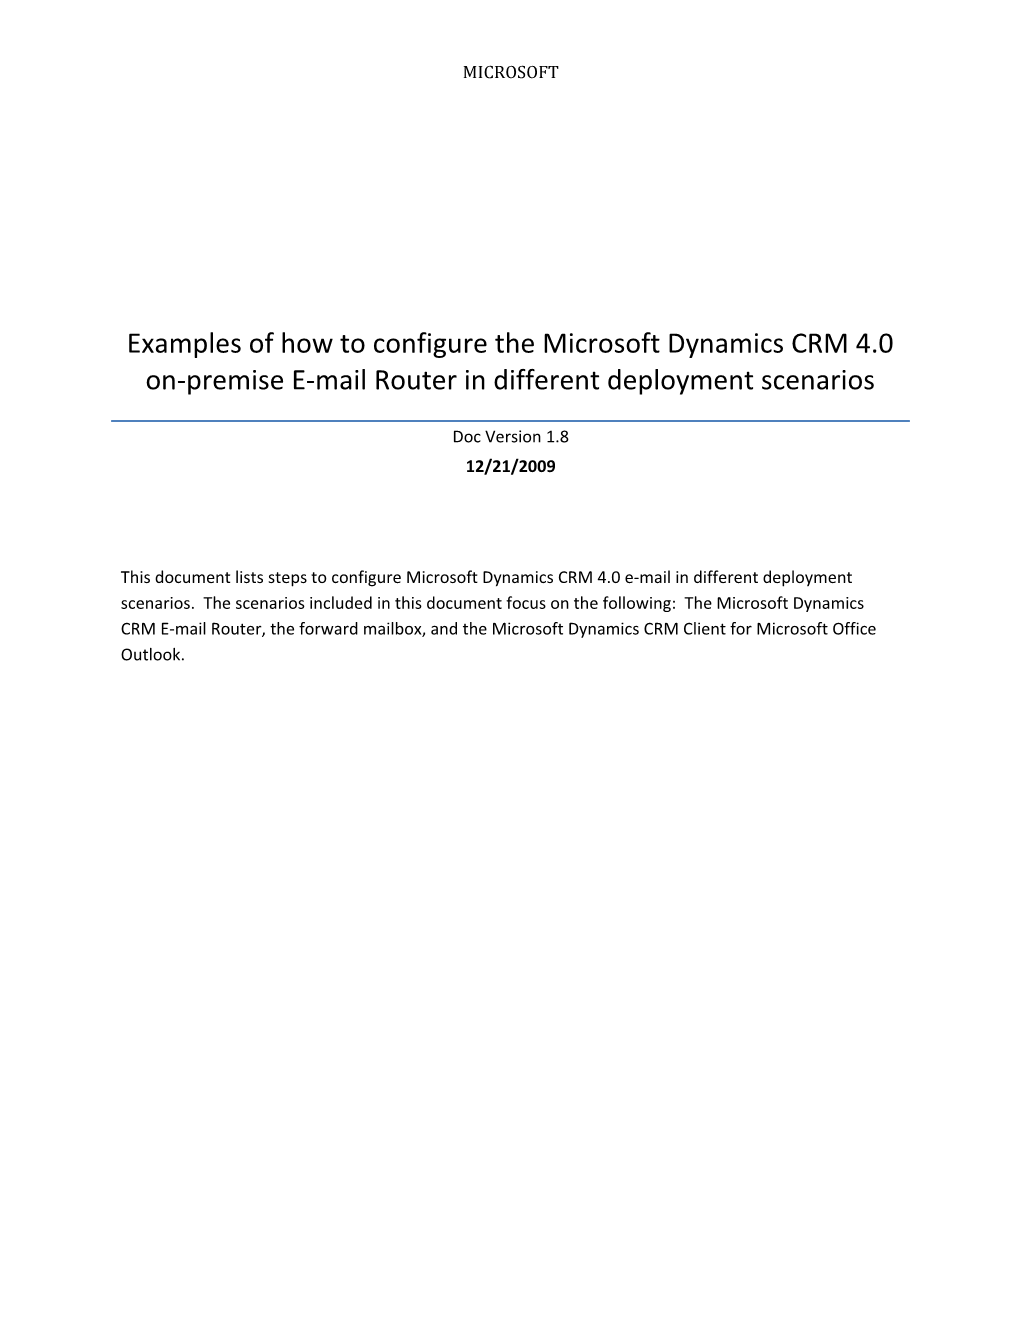 Examples of How to Configure the Microsoft Dynamics CRM 4.0 On-Premise E-Mail Router In